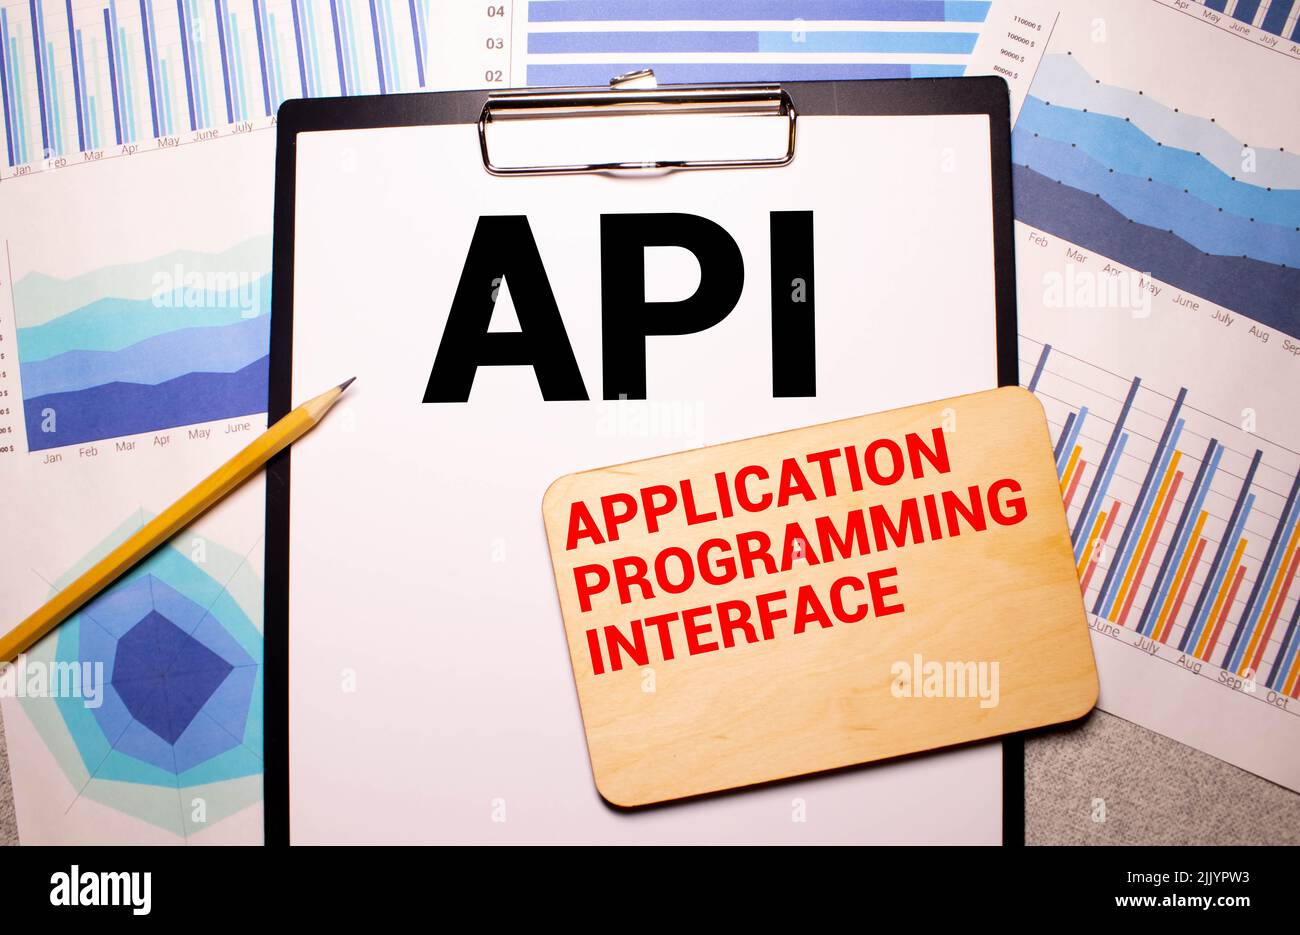 API - Application Programming Interface. Software development tool. Business, modern technology, internet and networking concept. Stock Photo